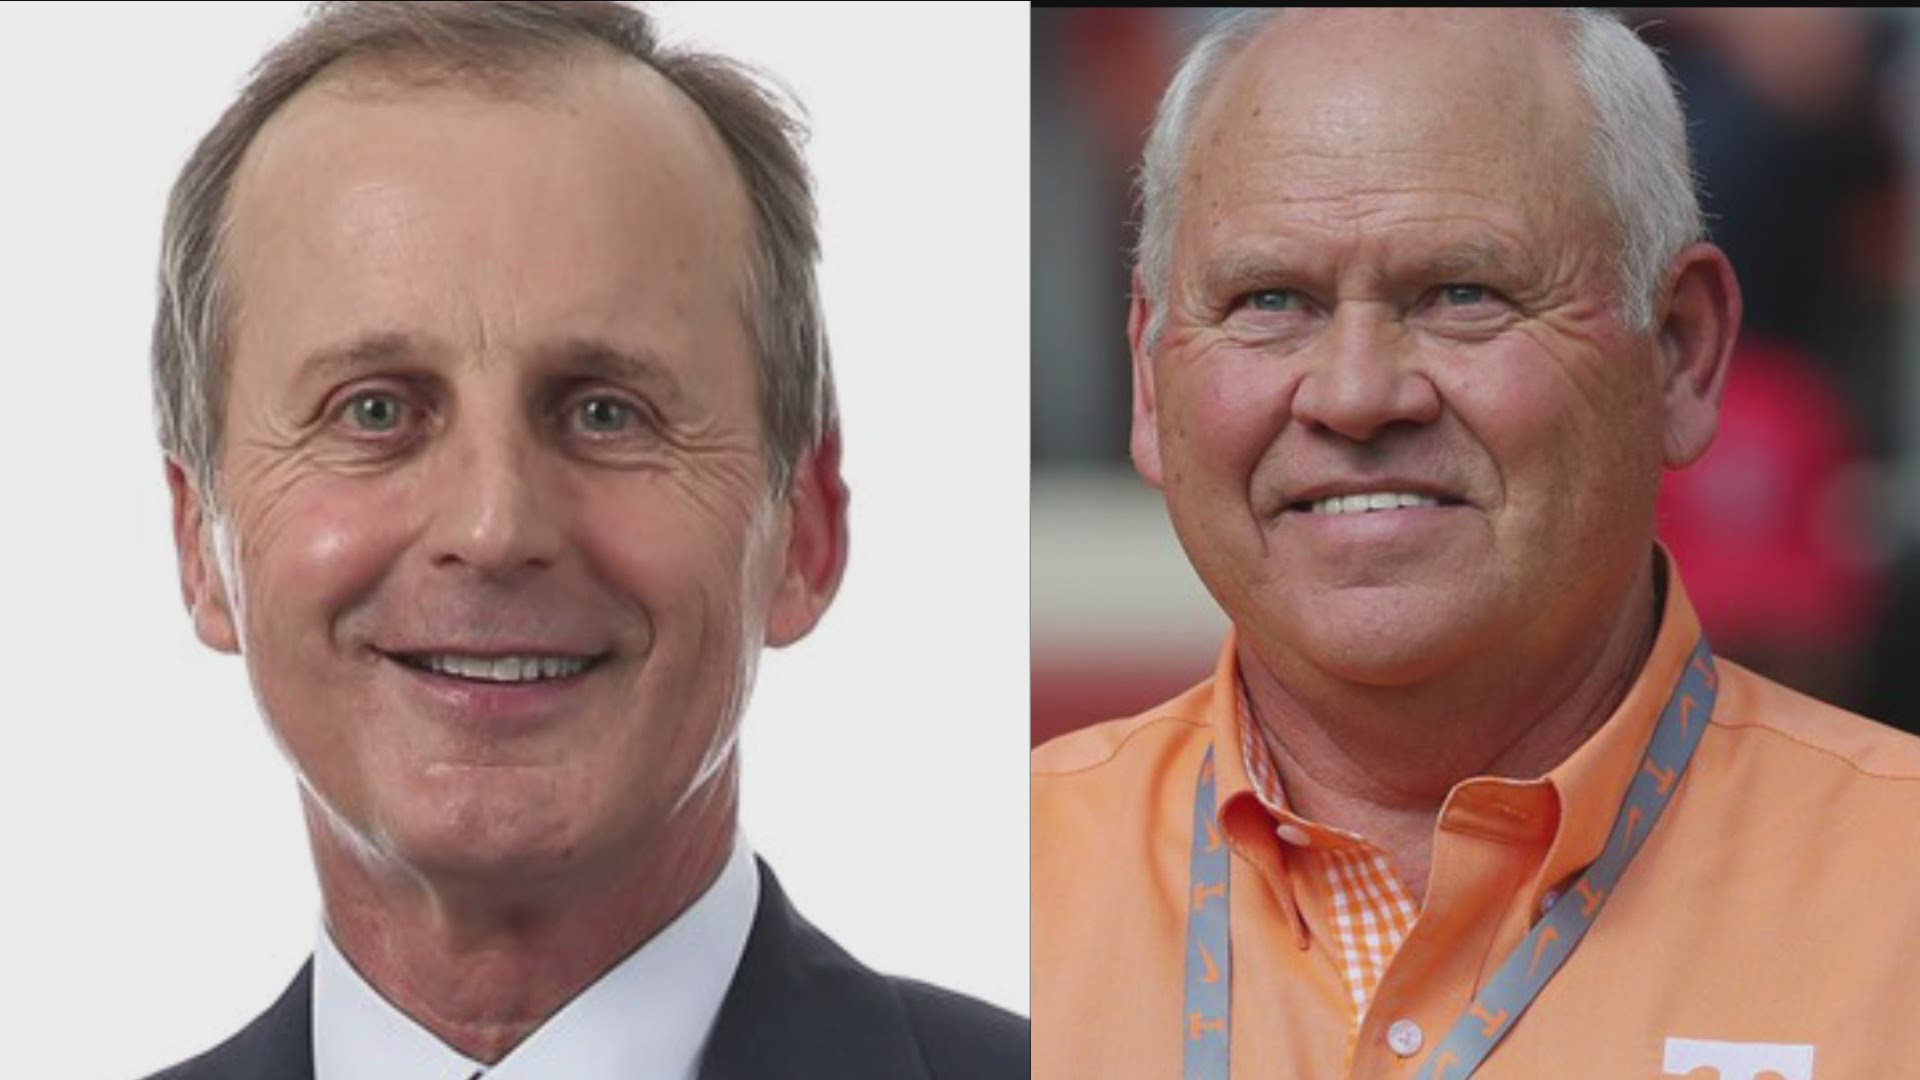 UT now says athletic director Philip Fulmer and head basketball coach Rick Barnes have recovered from the coronavirus.